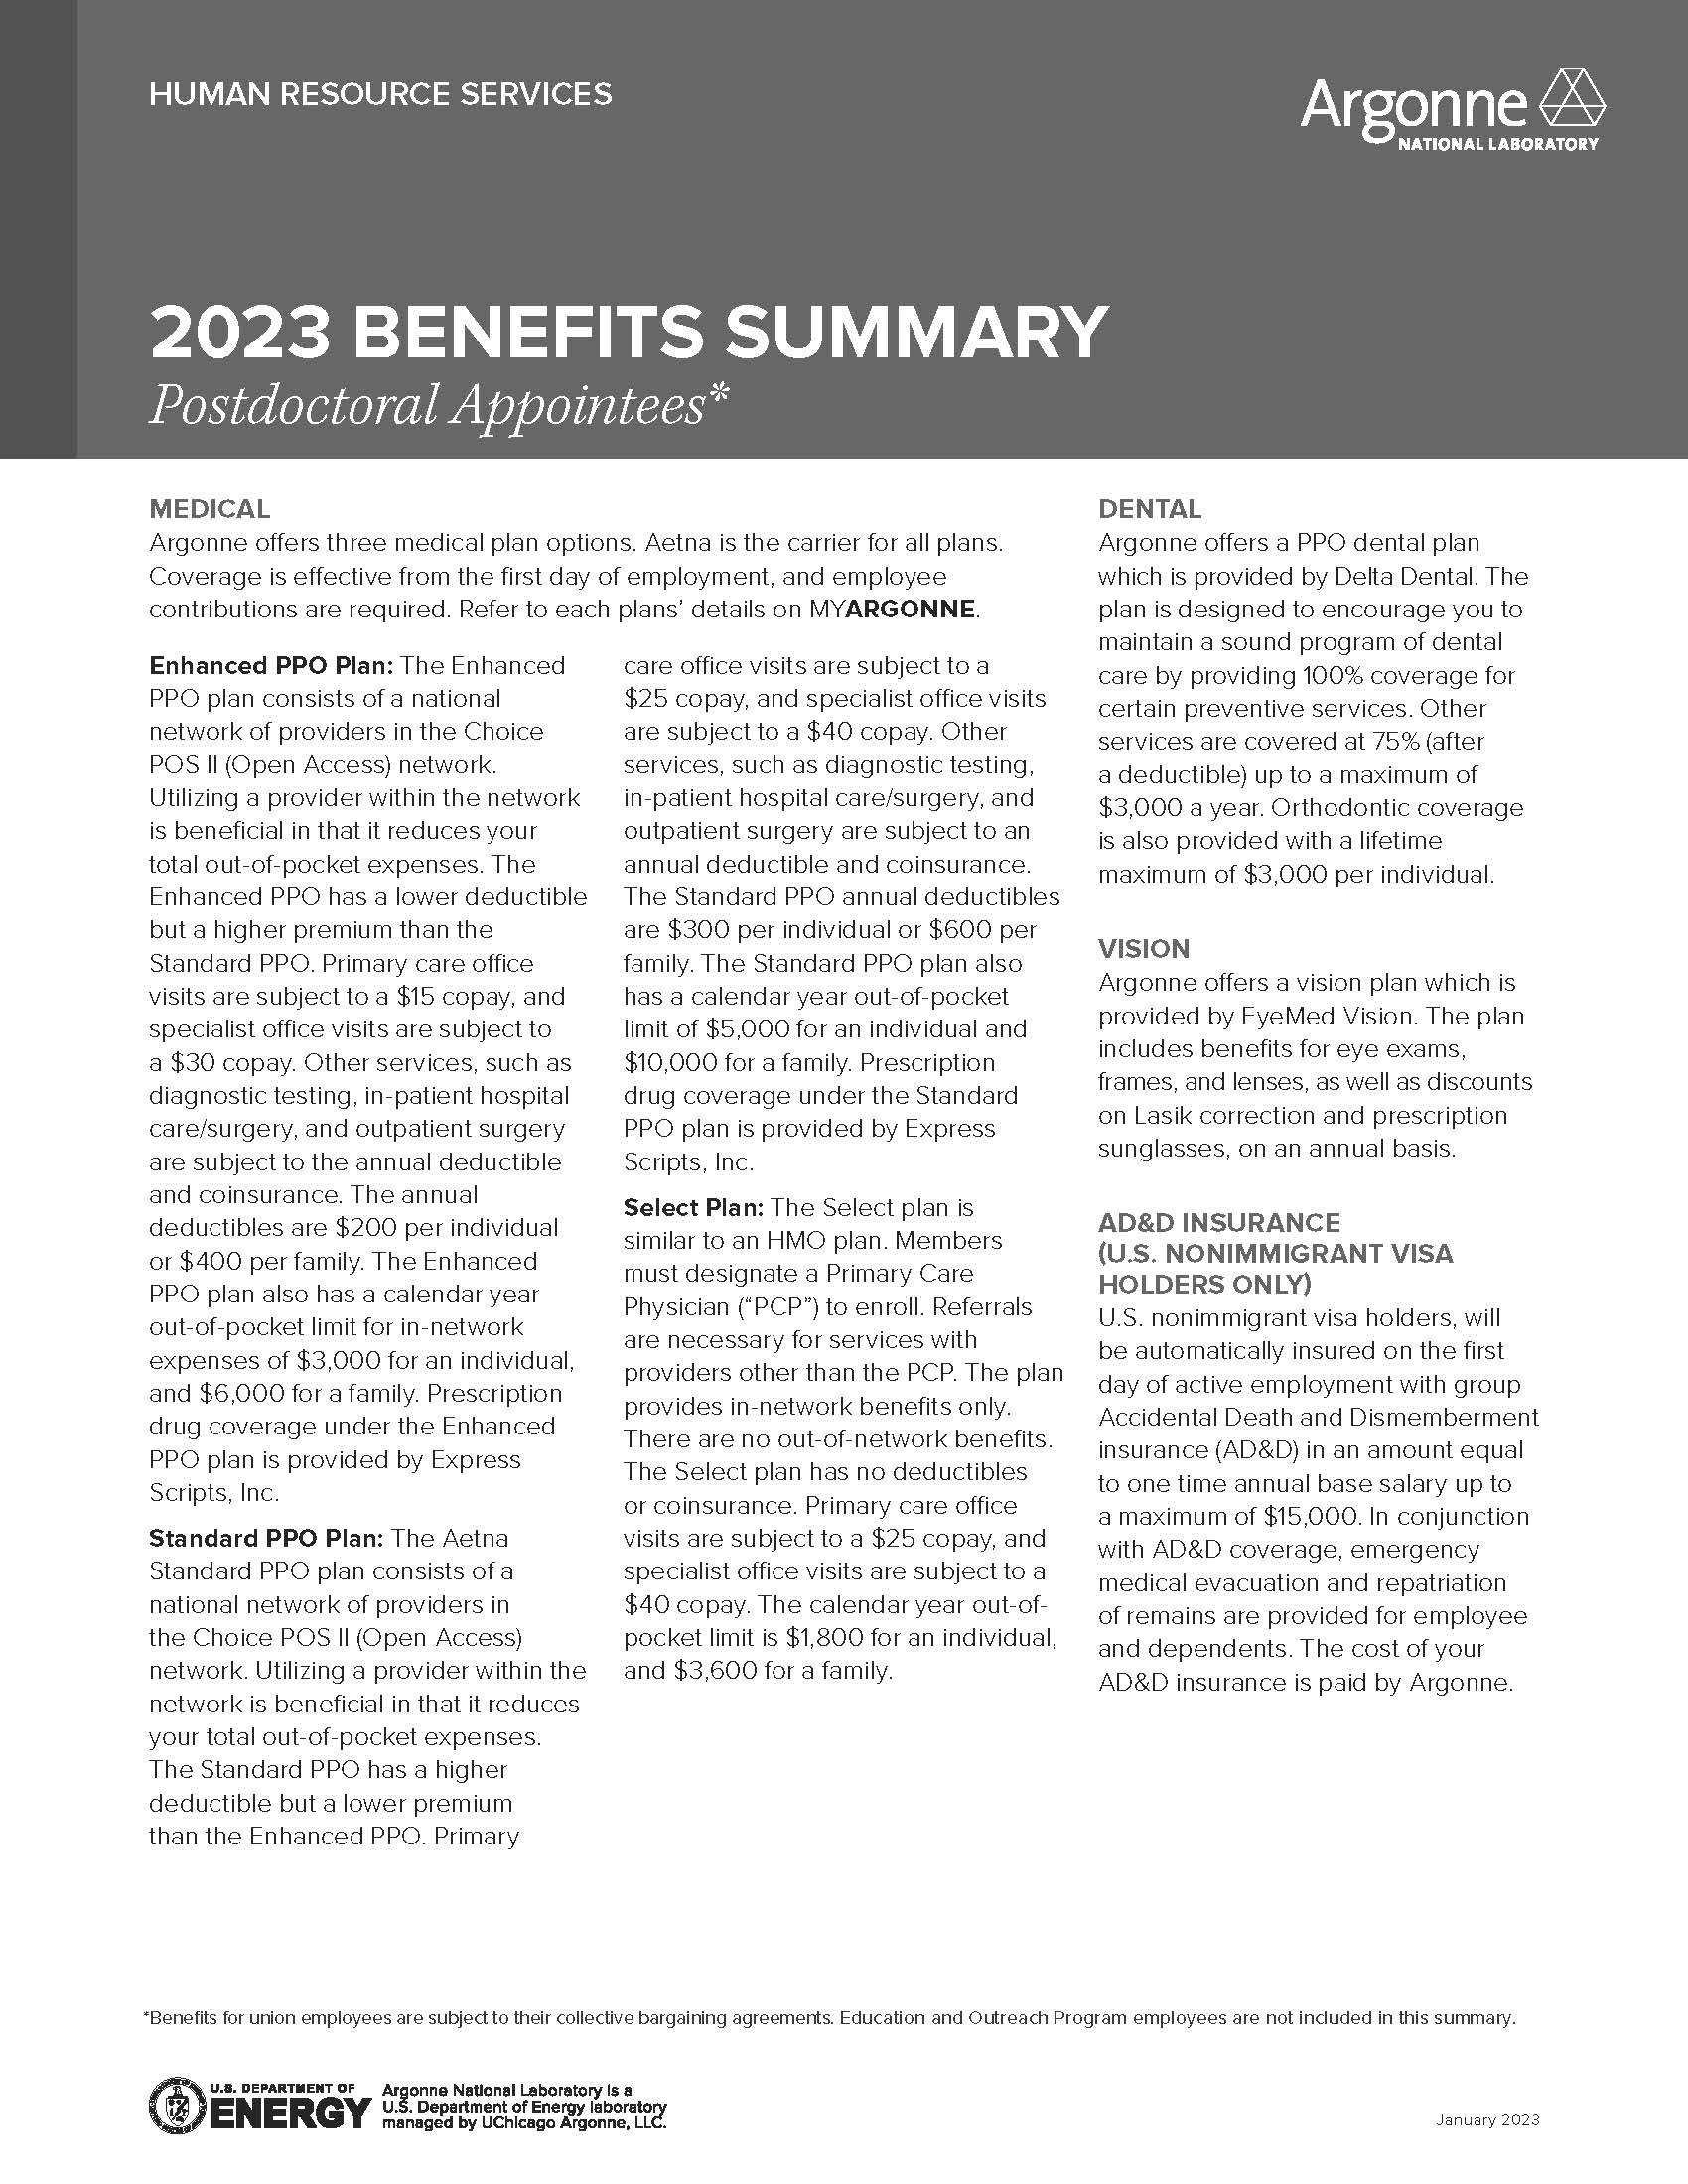 Text of 1st page of Postdoctoral Benefits Summary